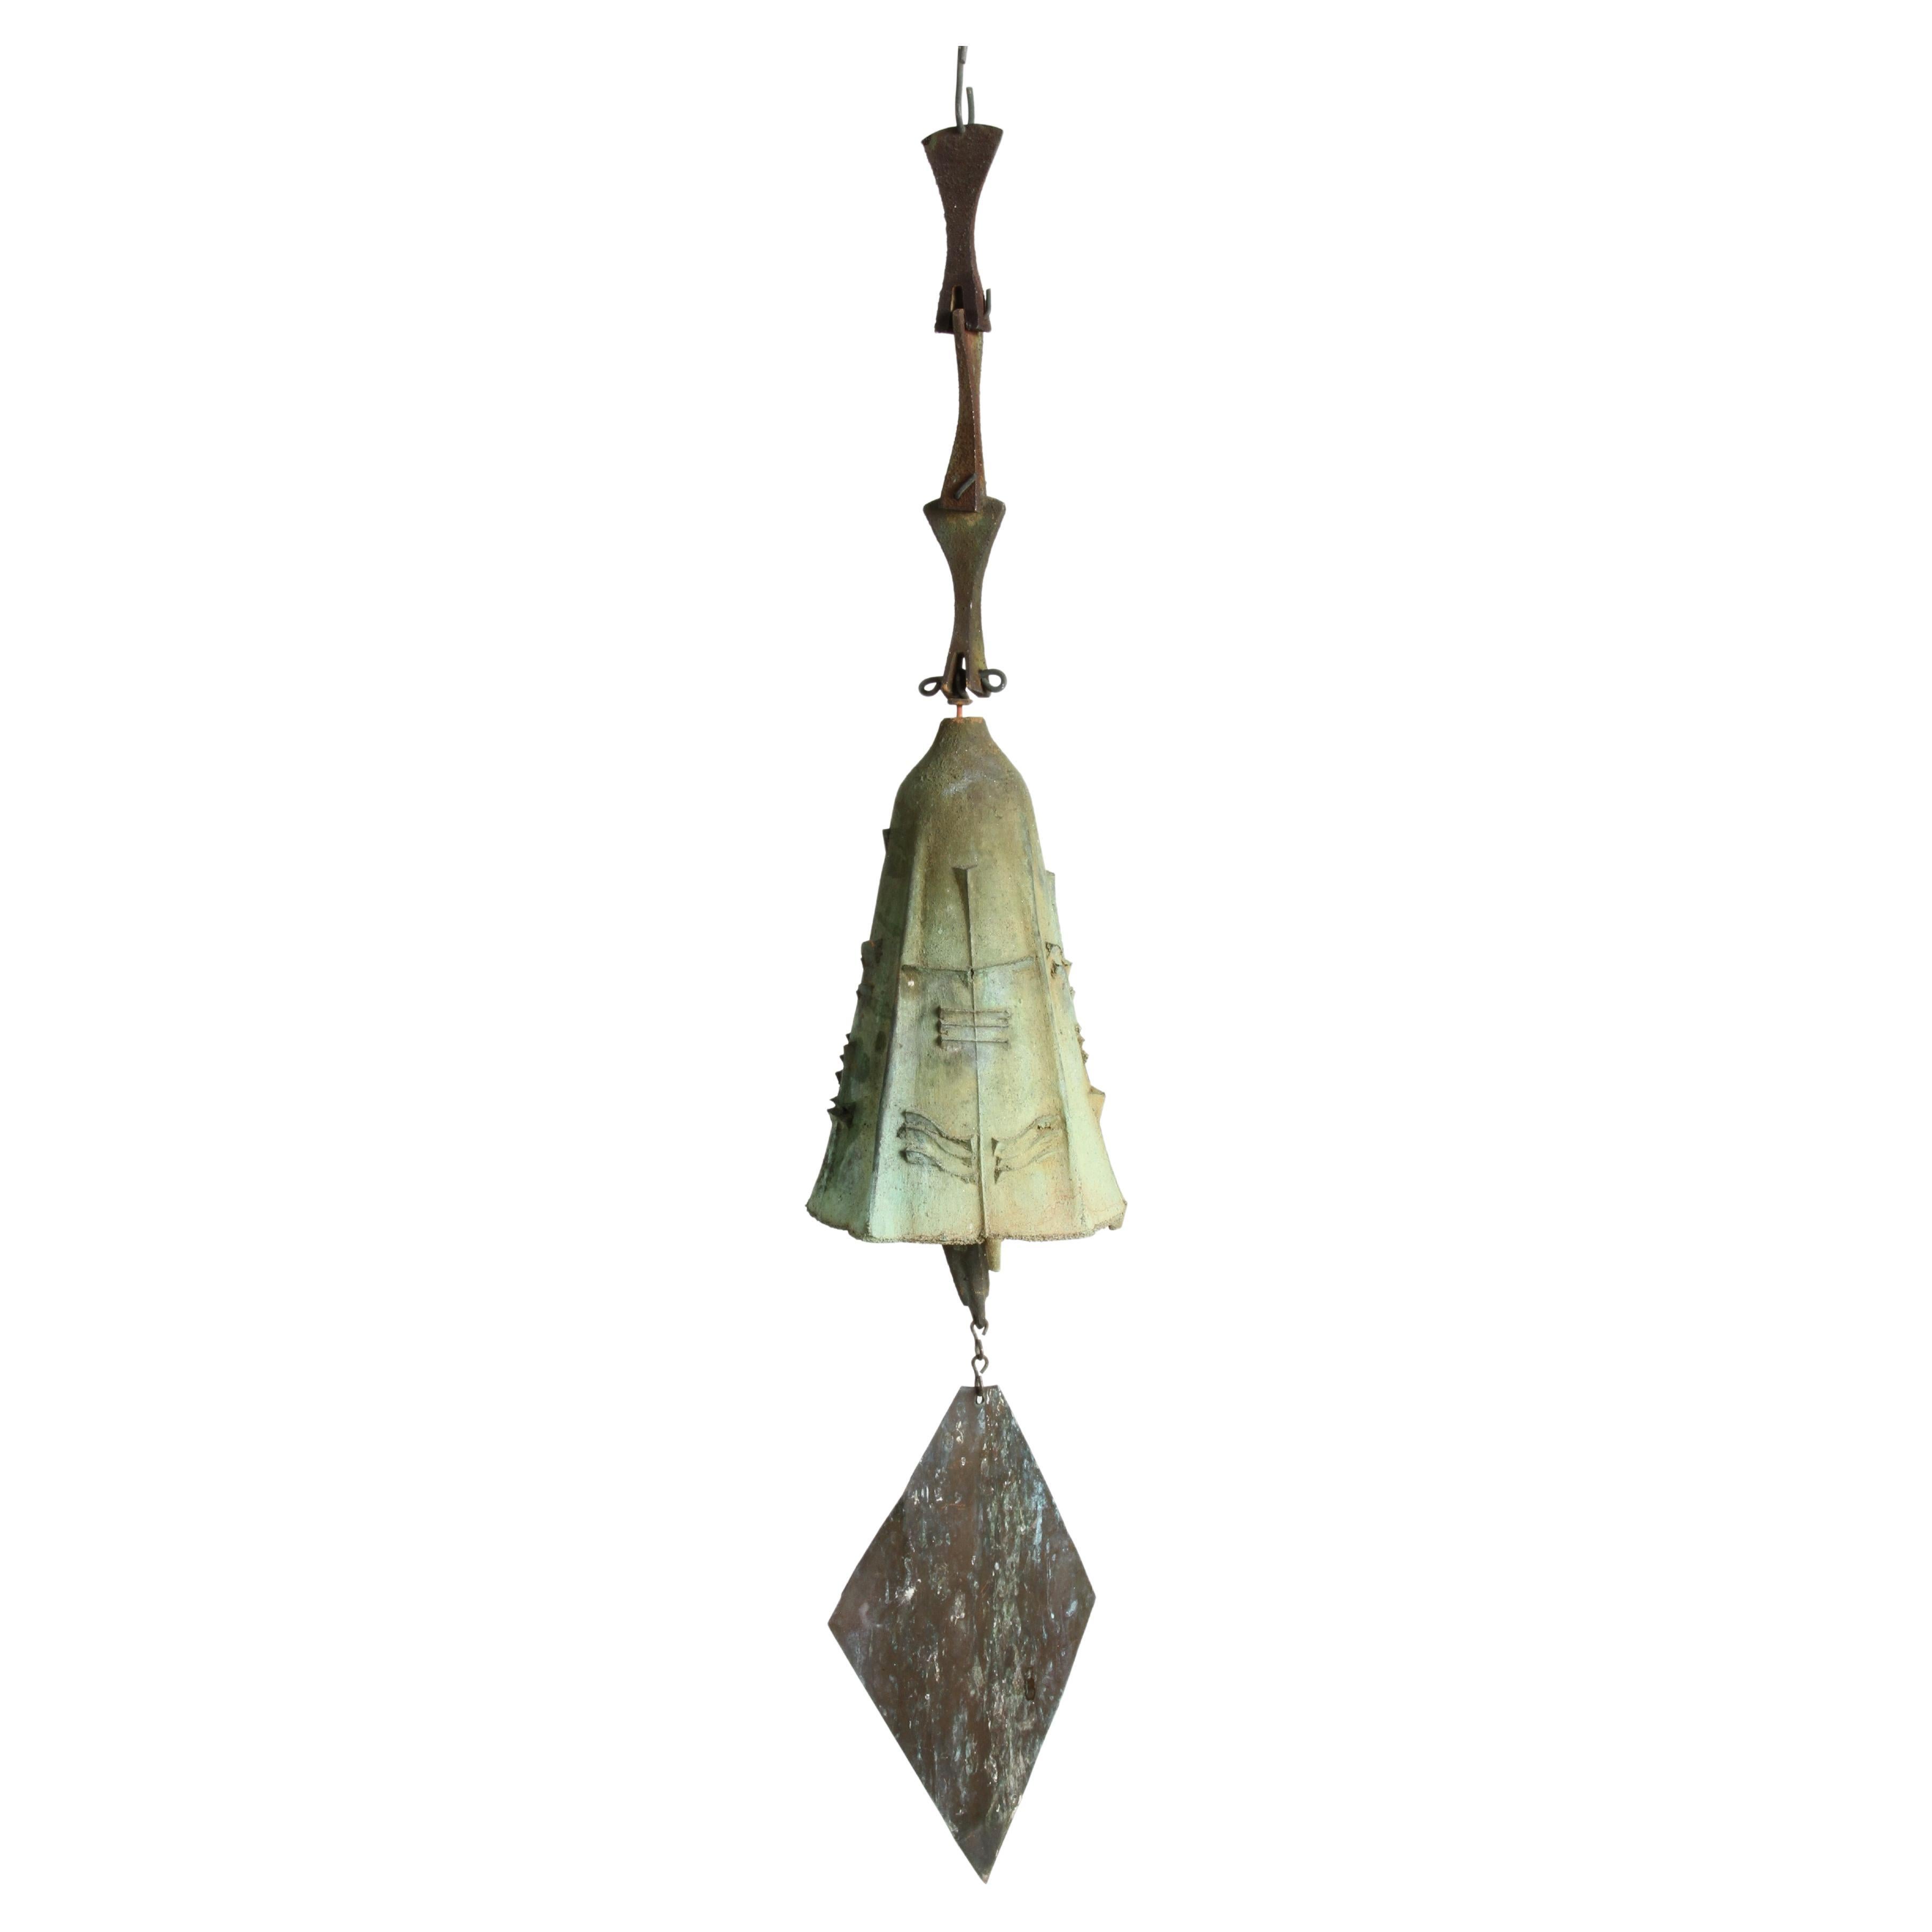 Early Large Scale Bronze Sculptural Wind Chime or Bell by Paolo Soleri - MCM